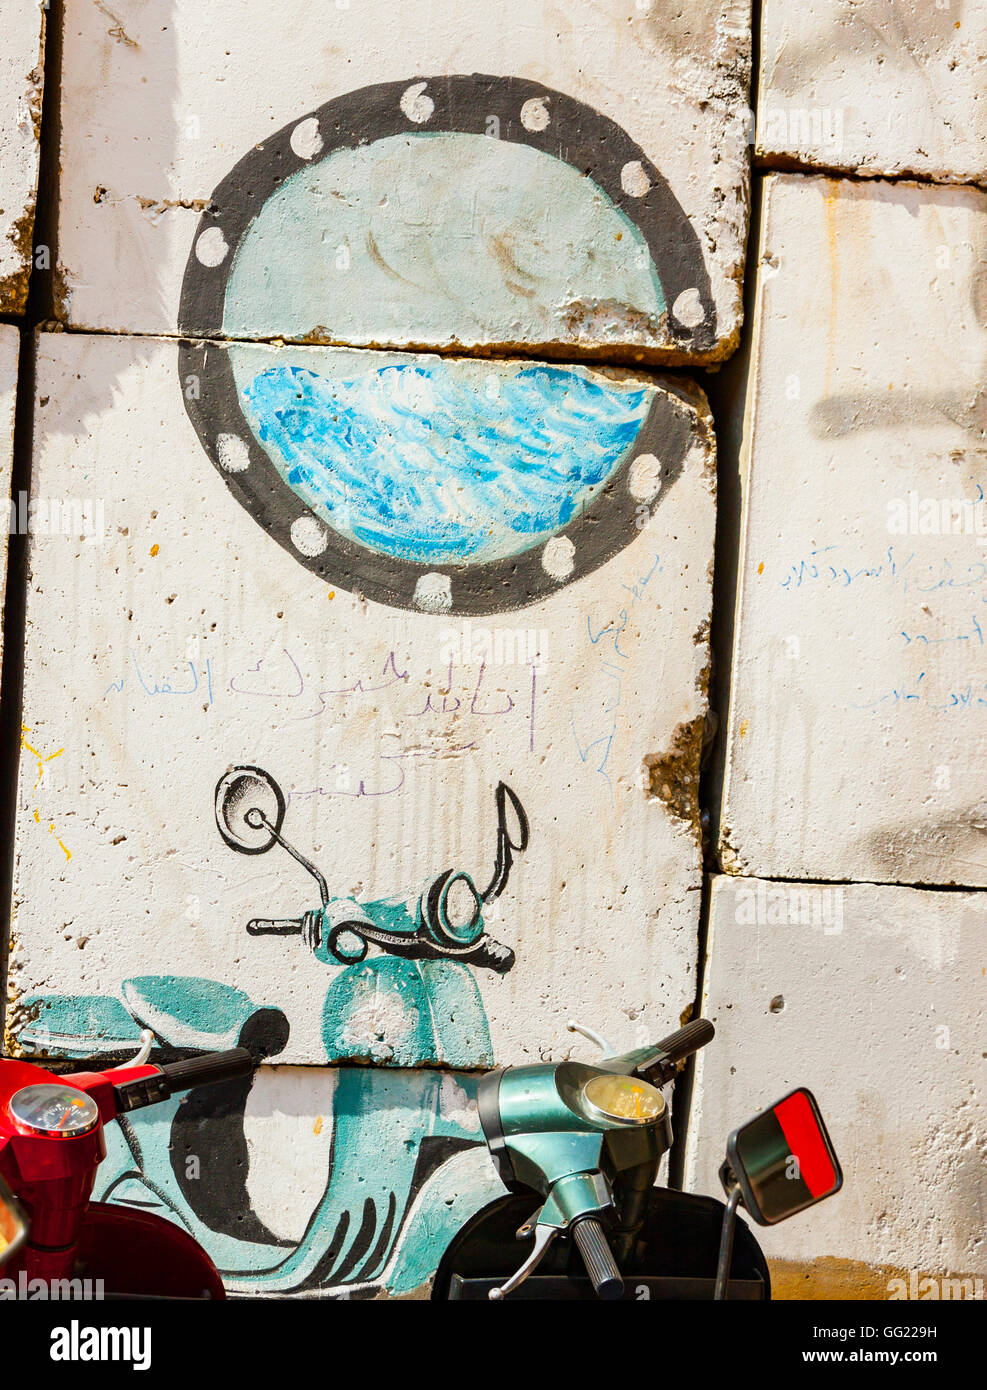 Egypt, Cairo, Street Art.There's a real blue scooter in front of the wall, confusing with another one painted on the wall. Stock Photo